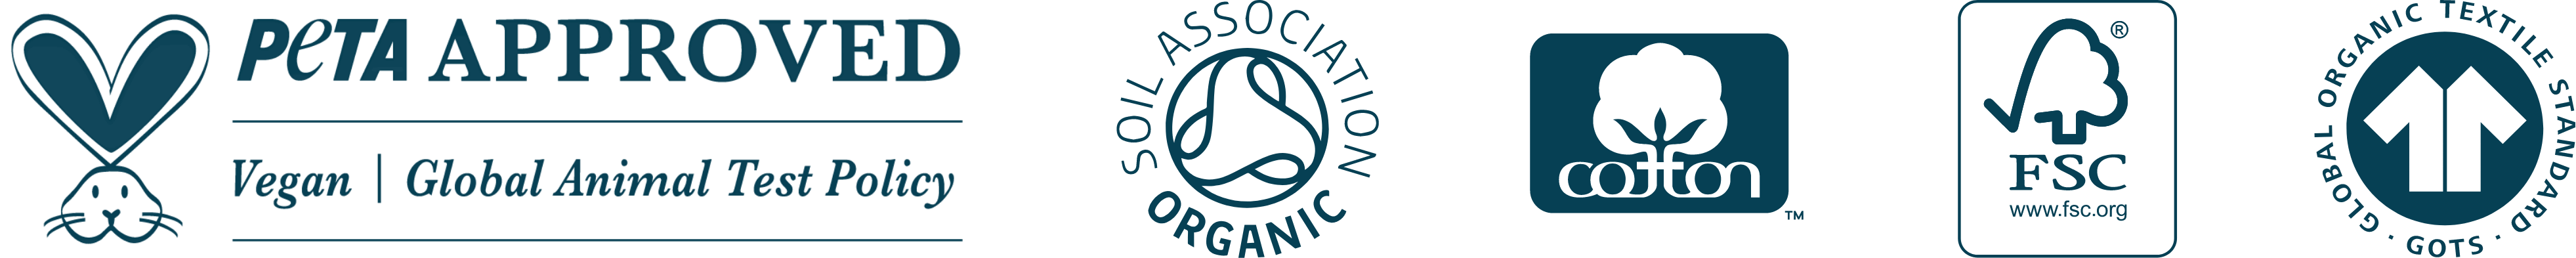 Organic Tampons Certifications